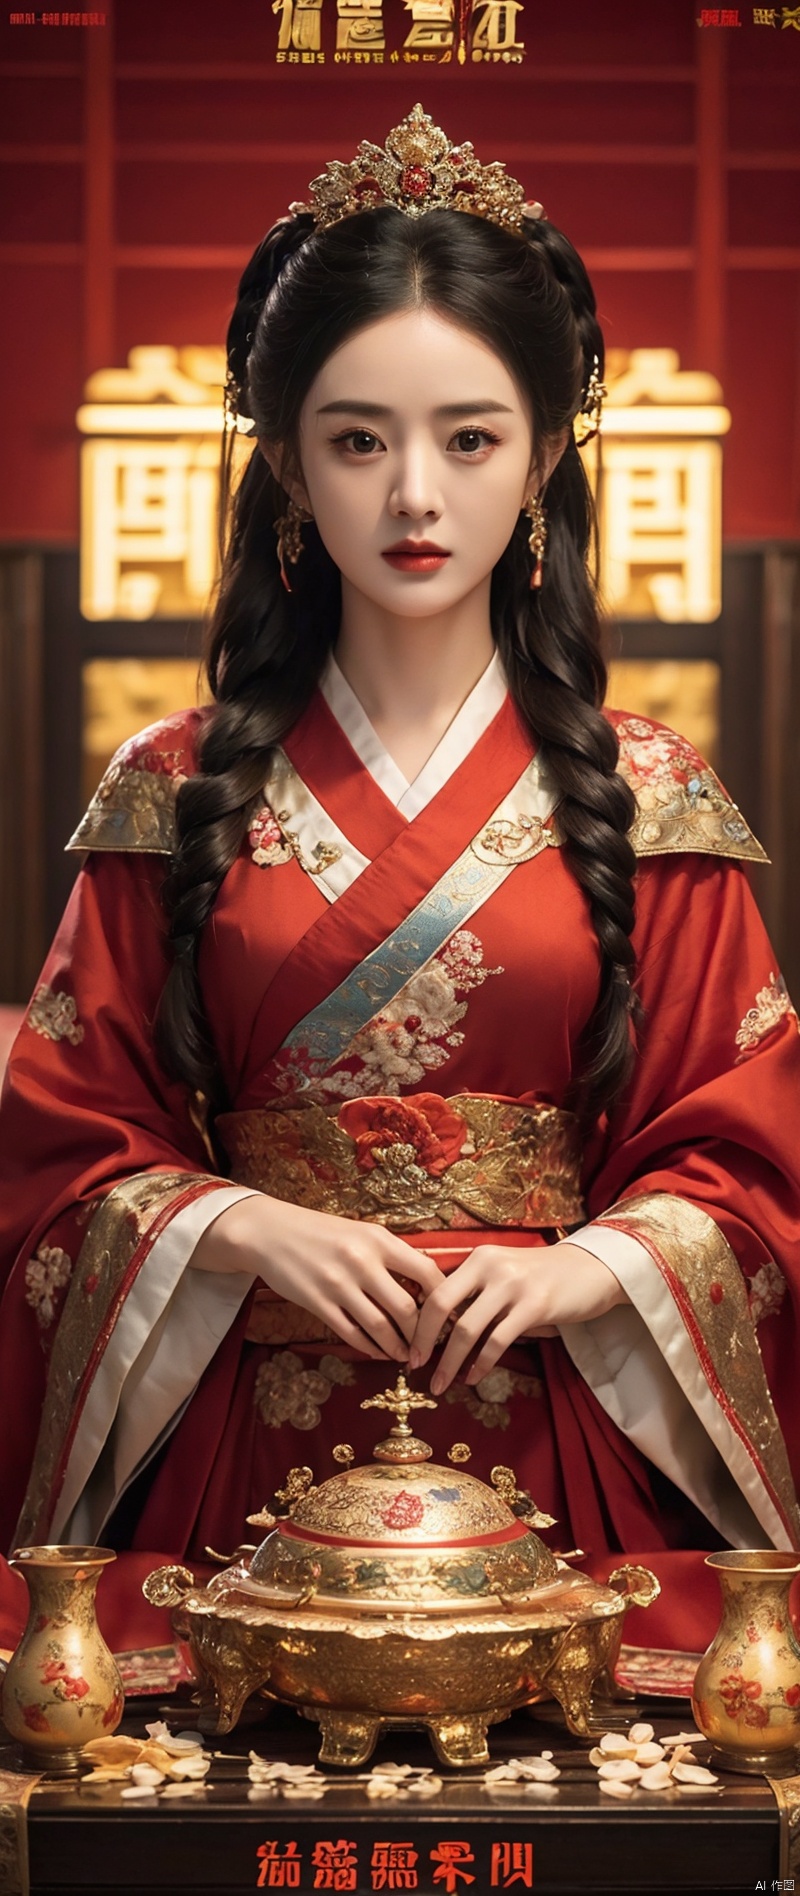  The most esoteric、top-quality、Photorealsitic、A hyper-realistic、Movie Poster、three kingdom, guofeng, zhaoliying